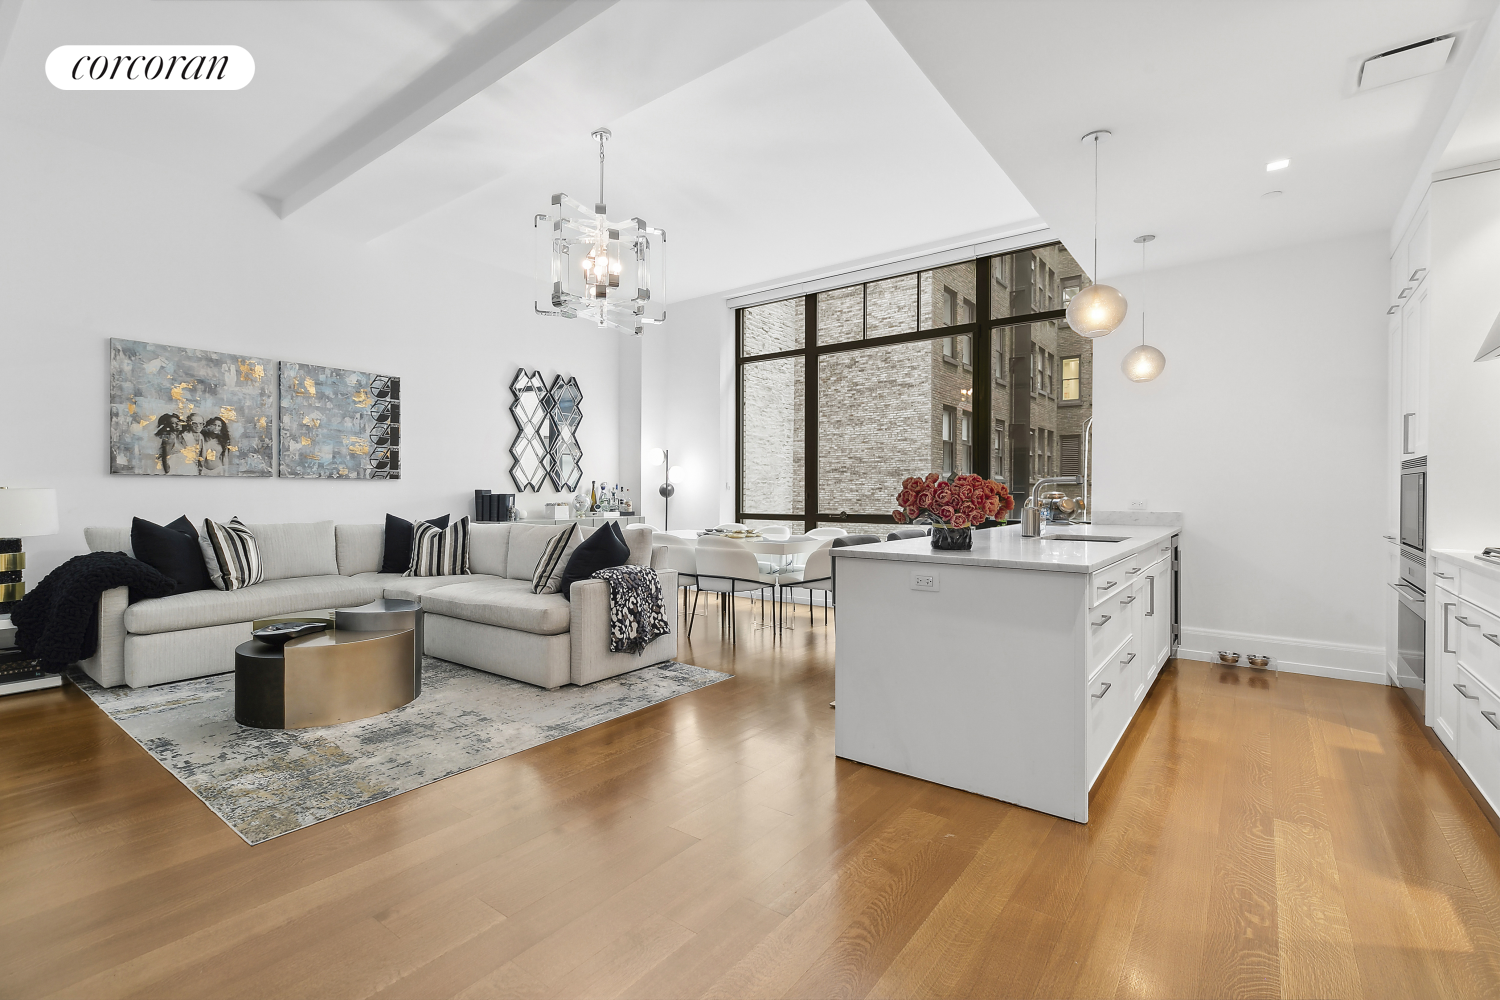 10 Madison Square 3B, Flatiron, Downtown, NYC - 3 Bedrooms  
3.5 Bathrooms  
5 Rooms - 